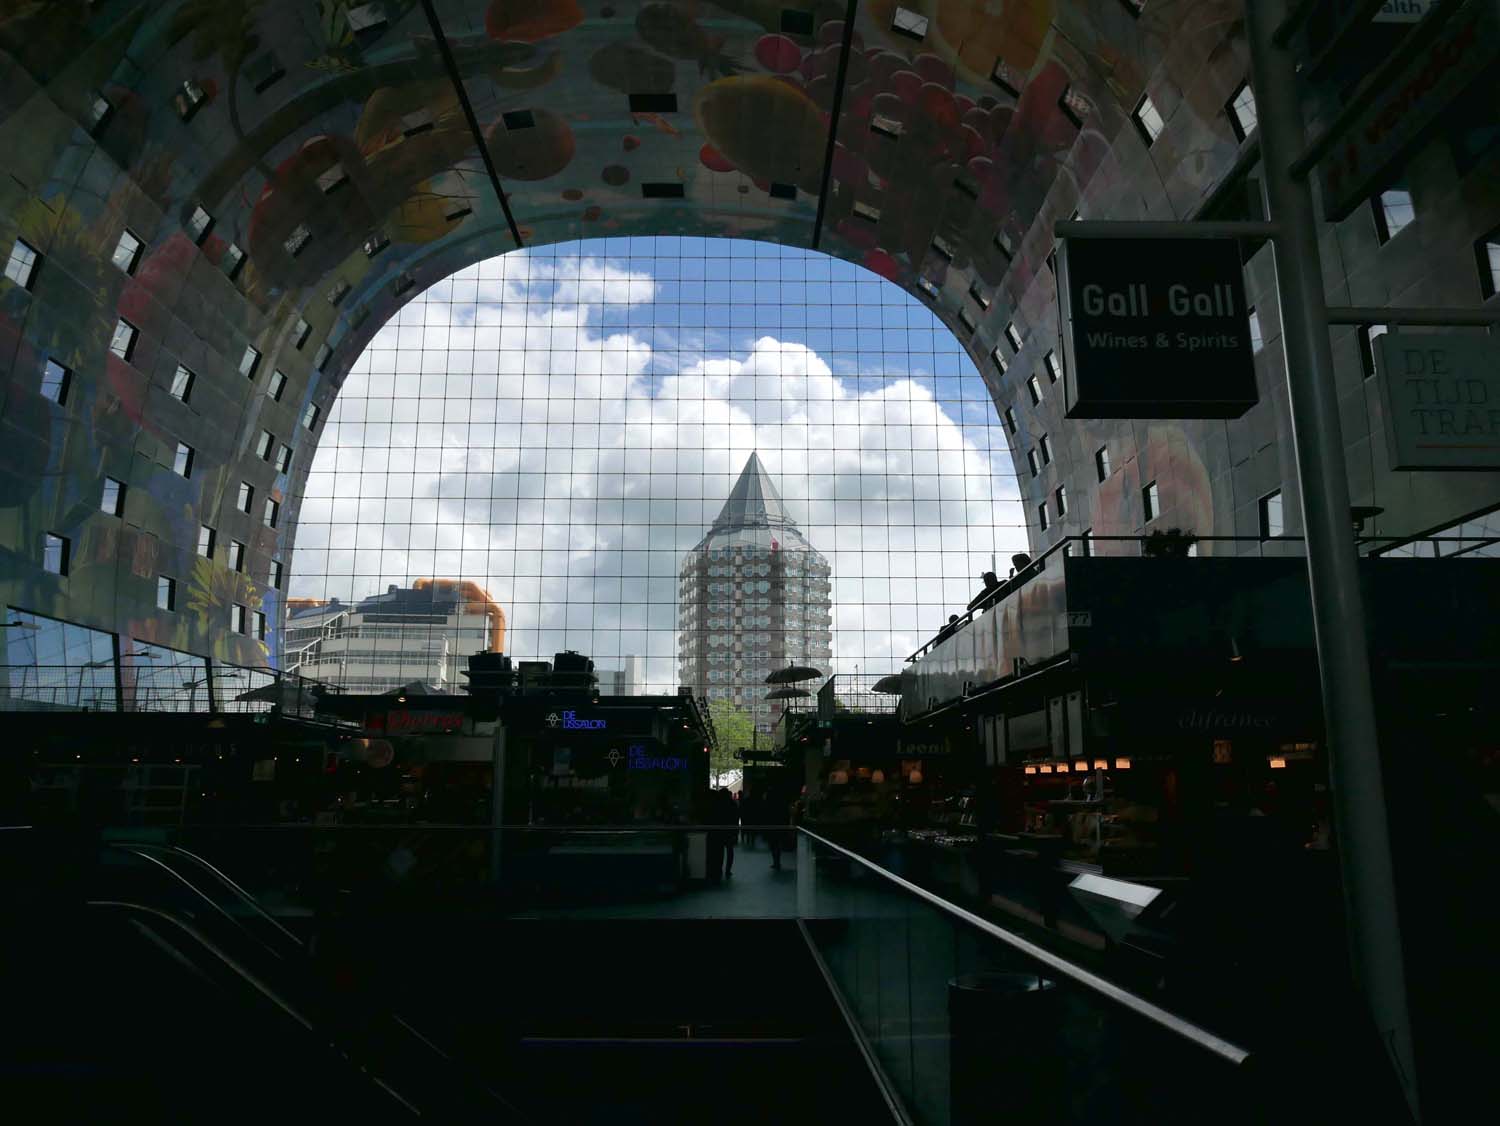 the view from inside the markthal